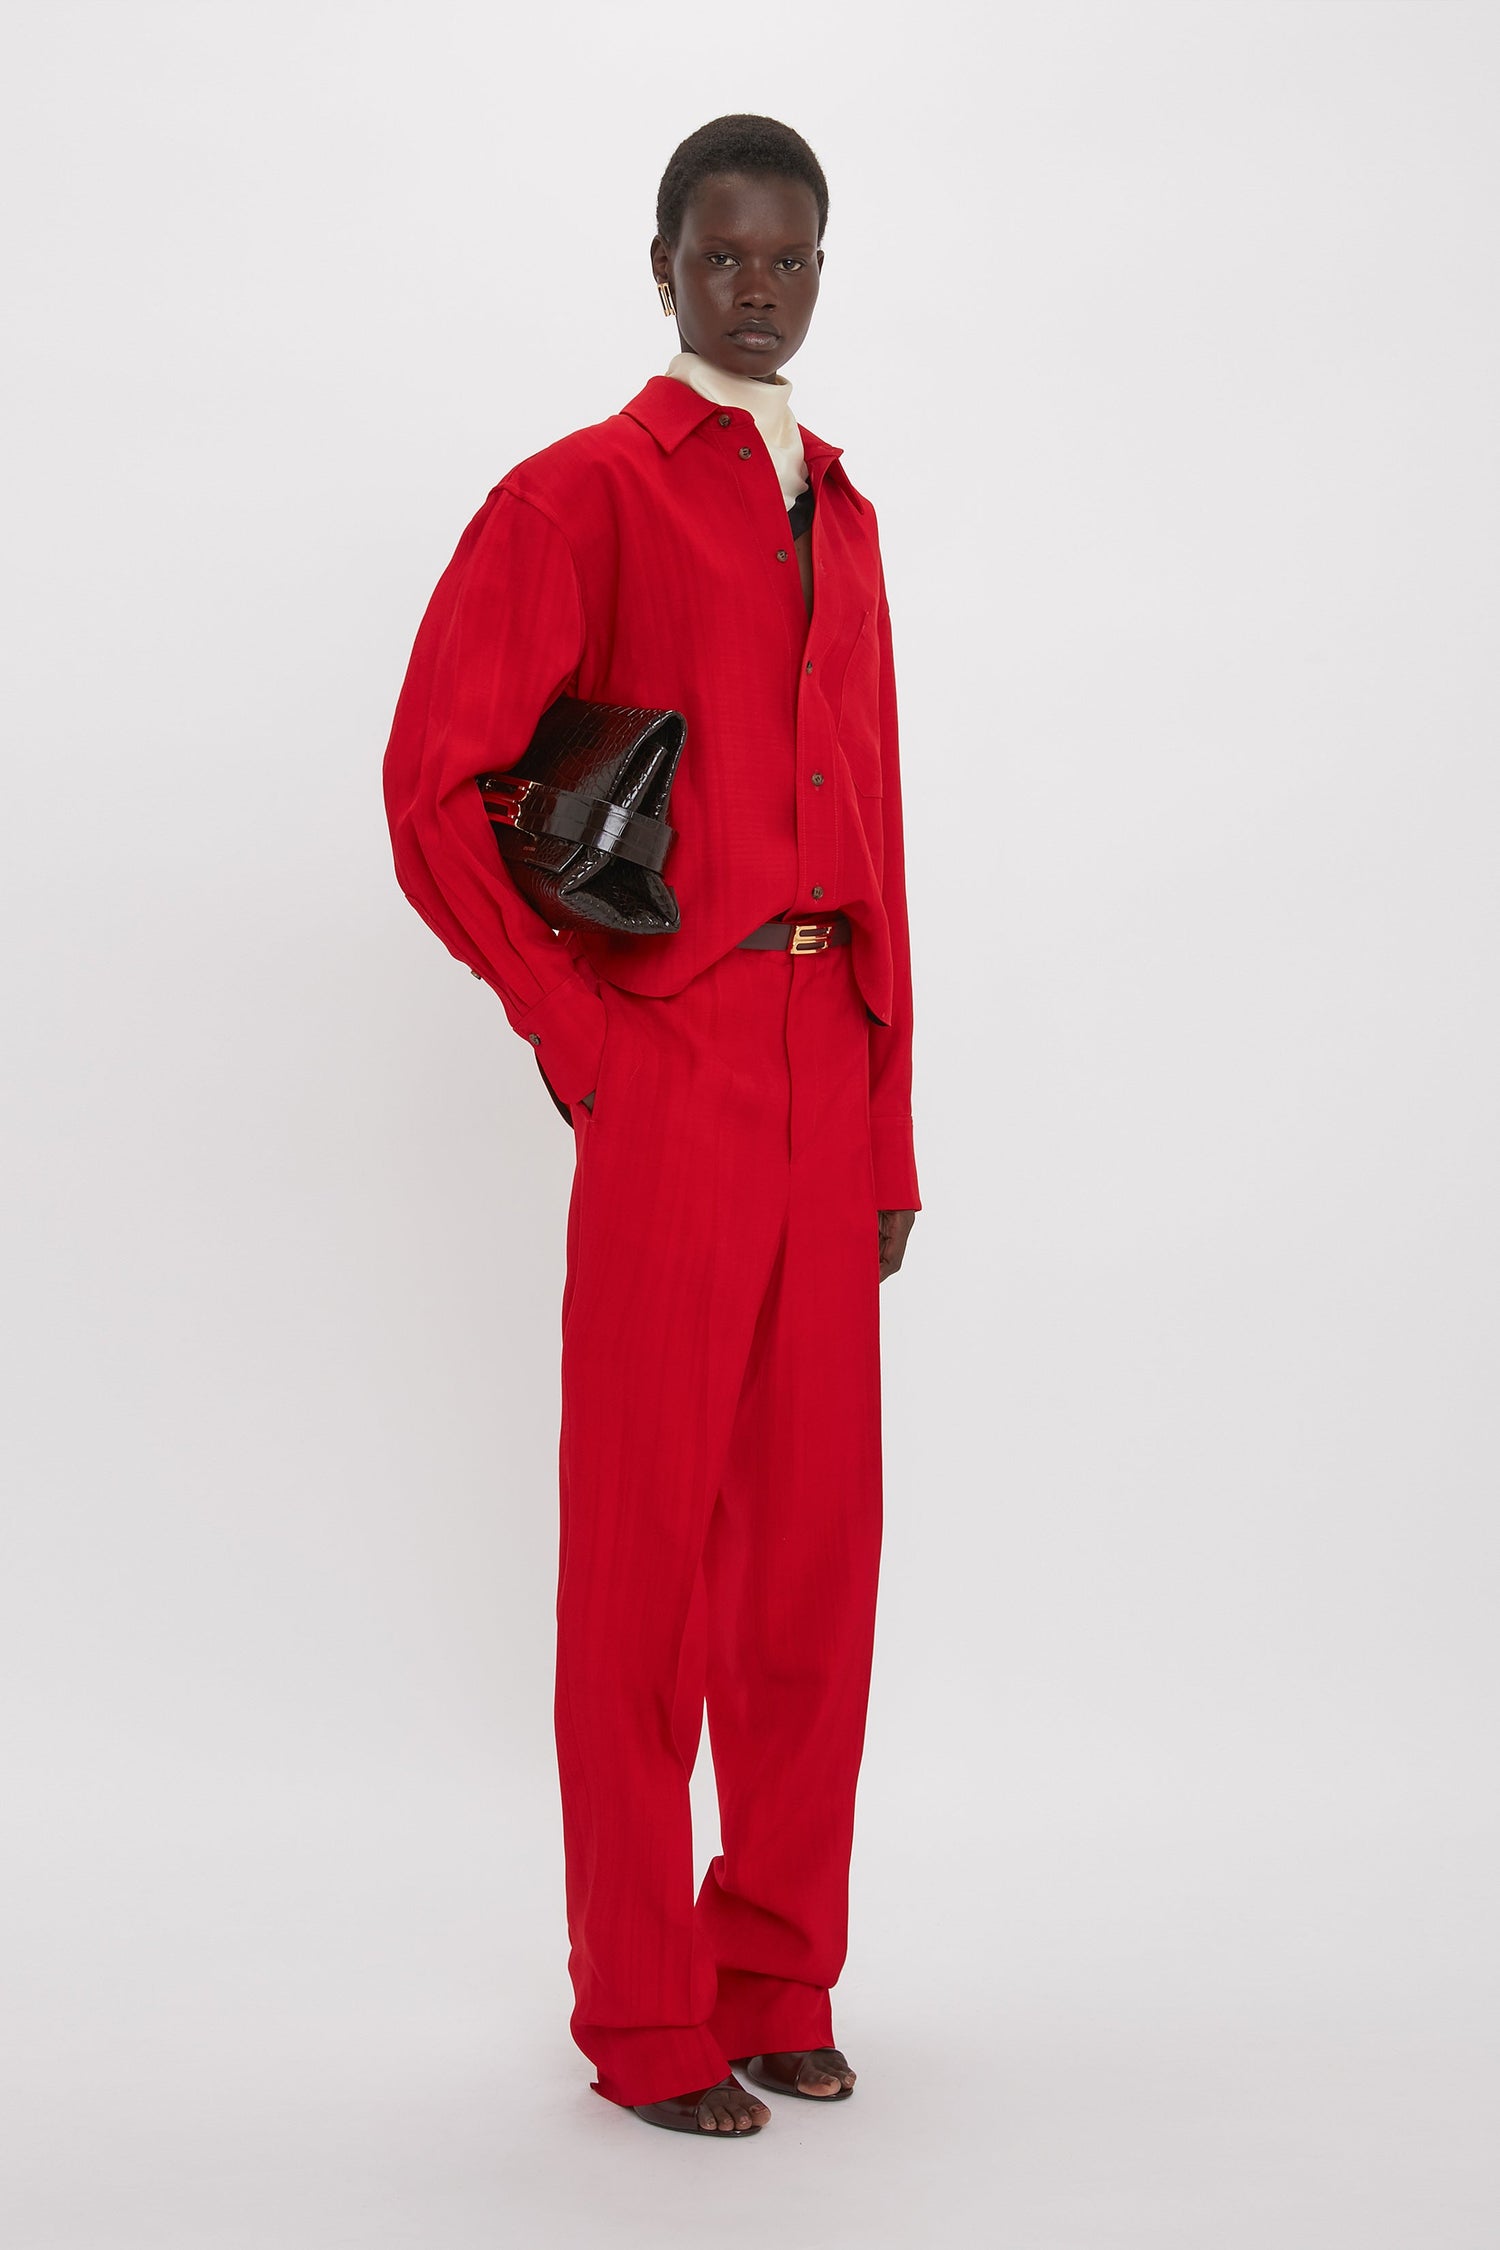 Person wearing a red button-up shirt and red pants, holding a Victoria Beckham B Pouch Bag In Croc Effect Espresso Leather, and standing against a plain white background.